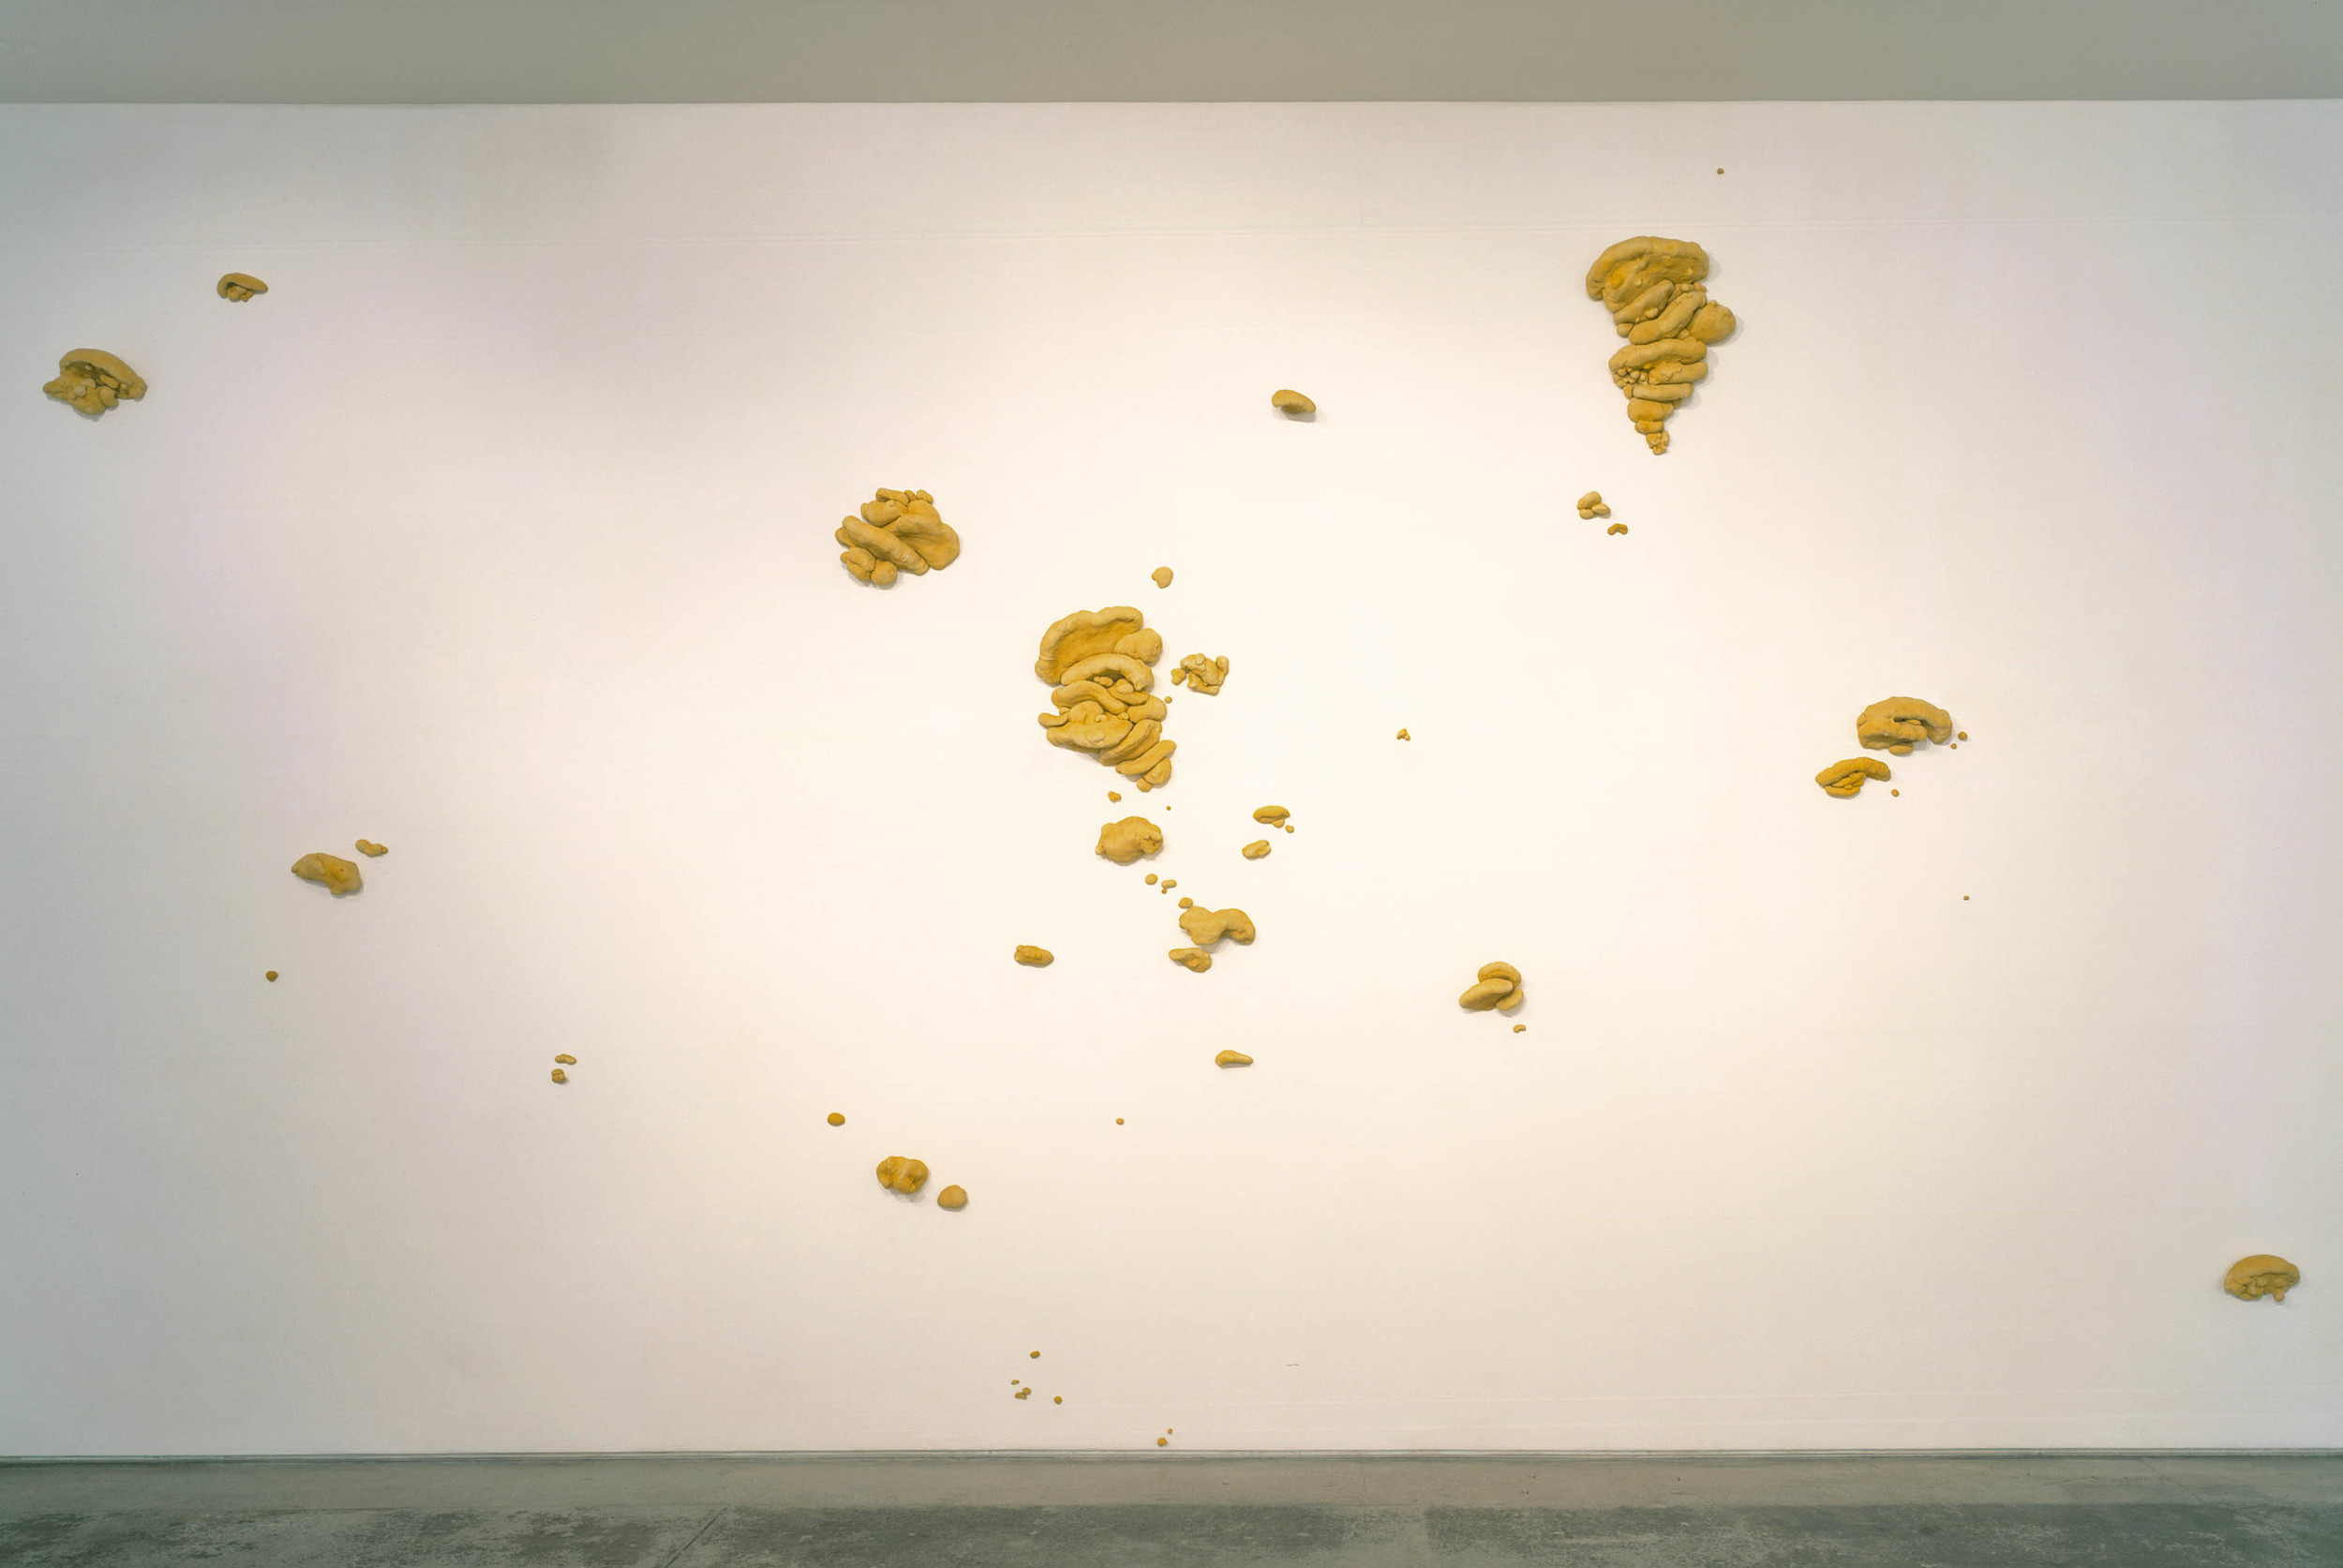  Sulfur Shelf Wall, 2001, Thermoset polymer, epoxy, stainless steel, lacquer, and oil, 155 x 292 x 7 inches 